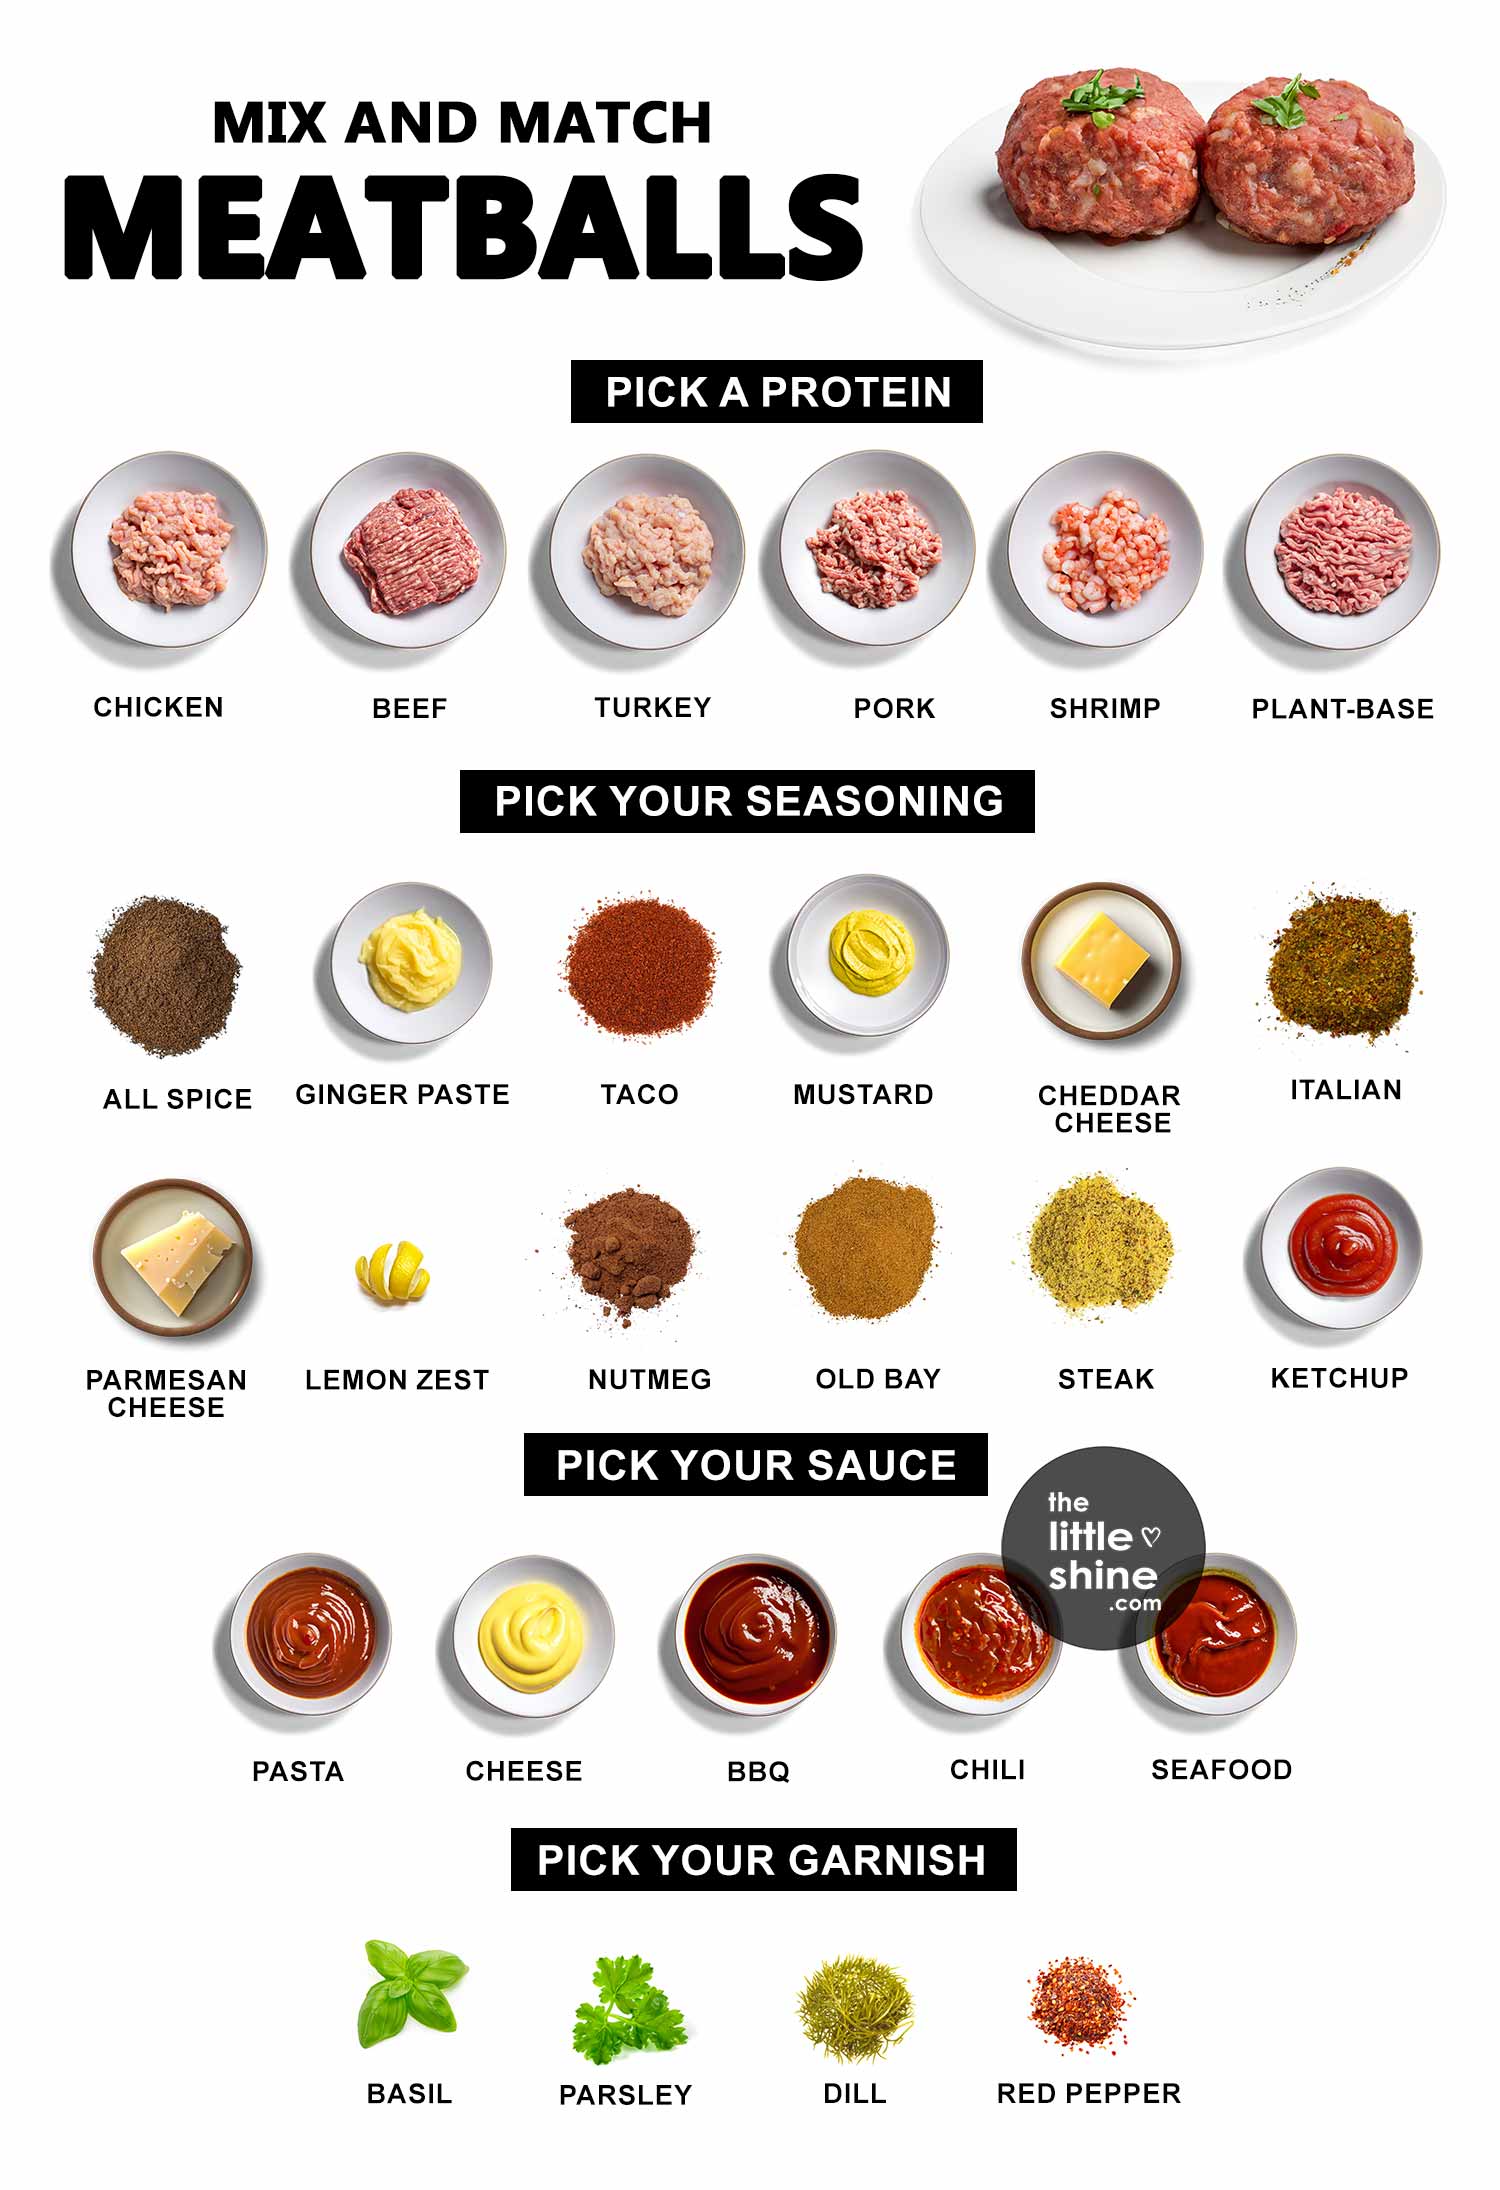 How to Make Meatballs| Build Your Own Mix and Match Meatballs - The ...